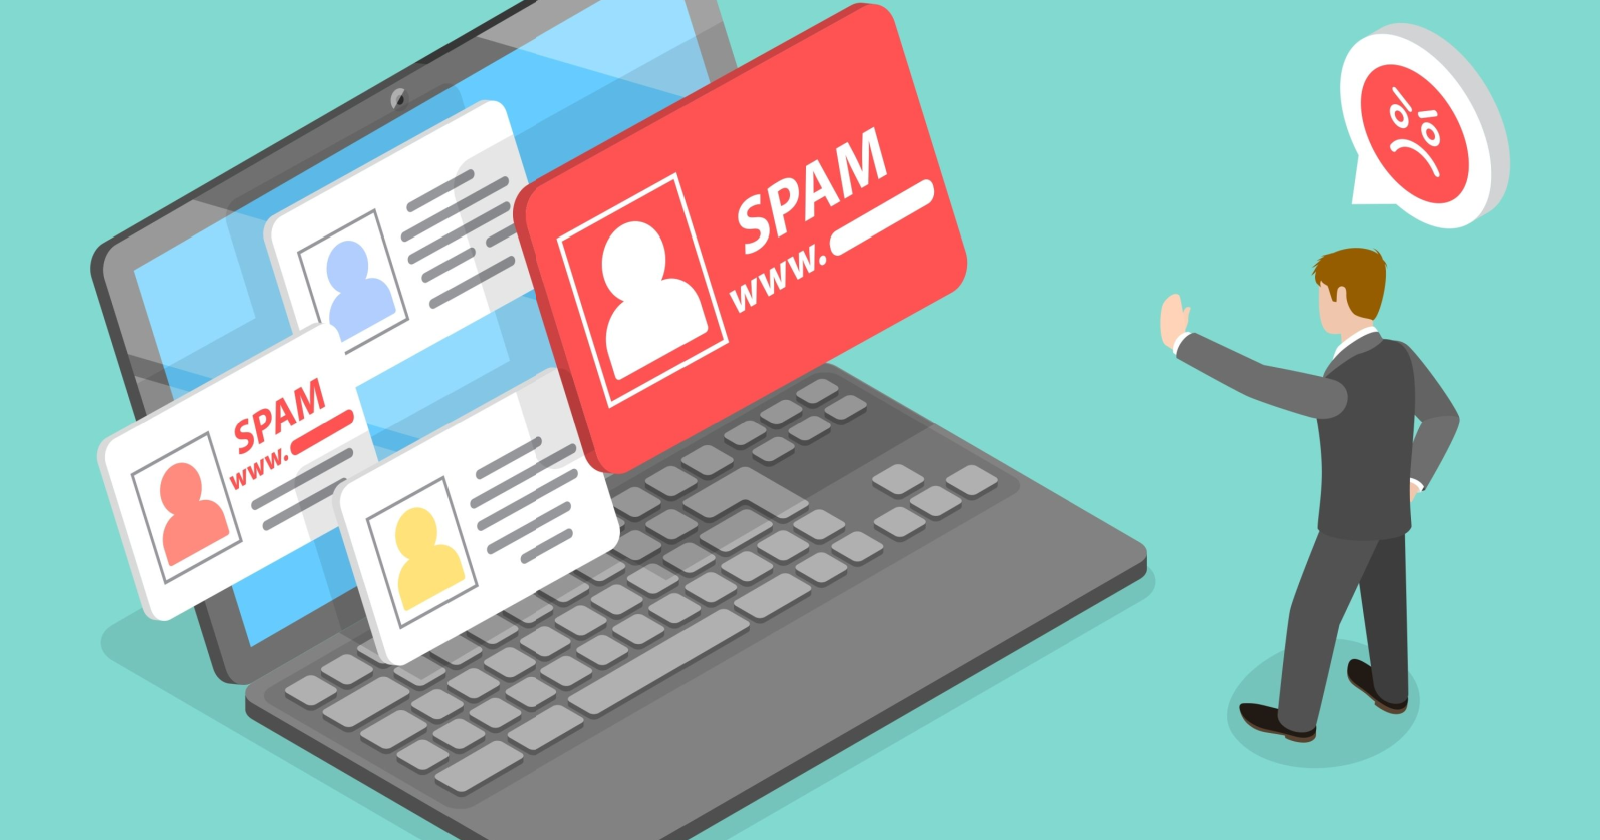 Google Rolls Out New Spam Algorithm Replace